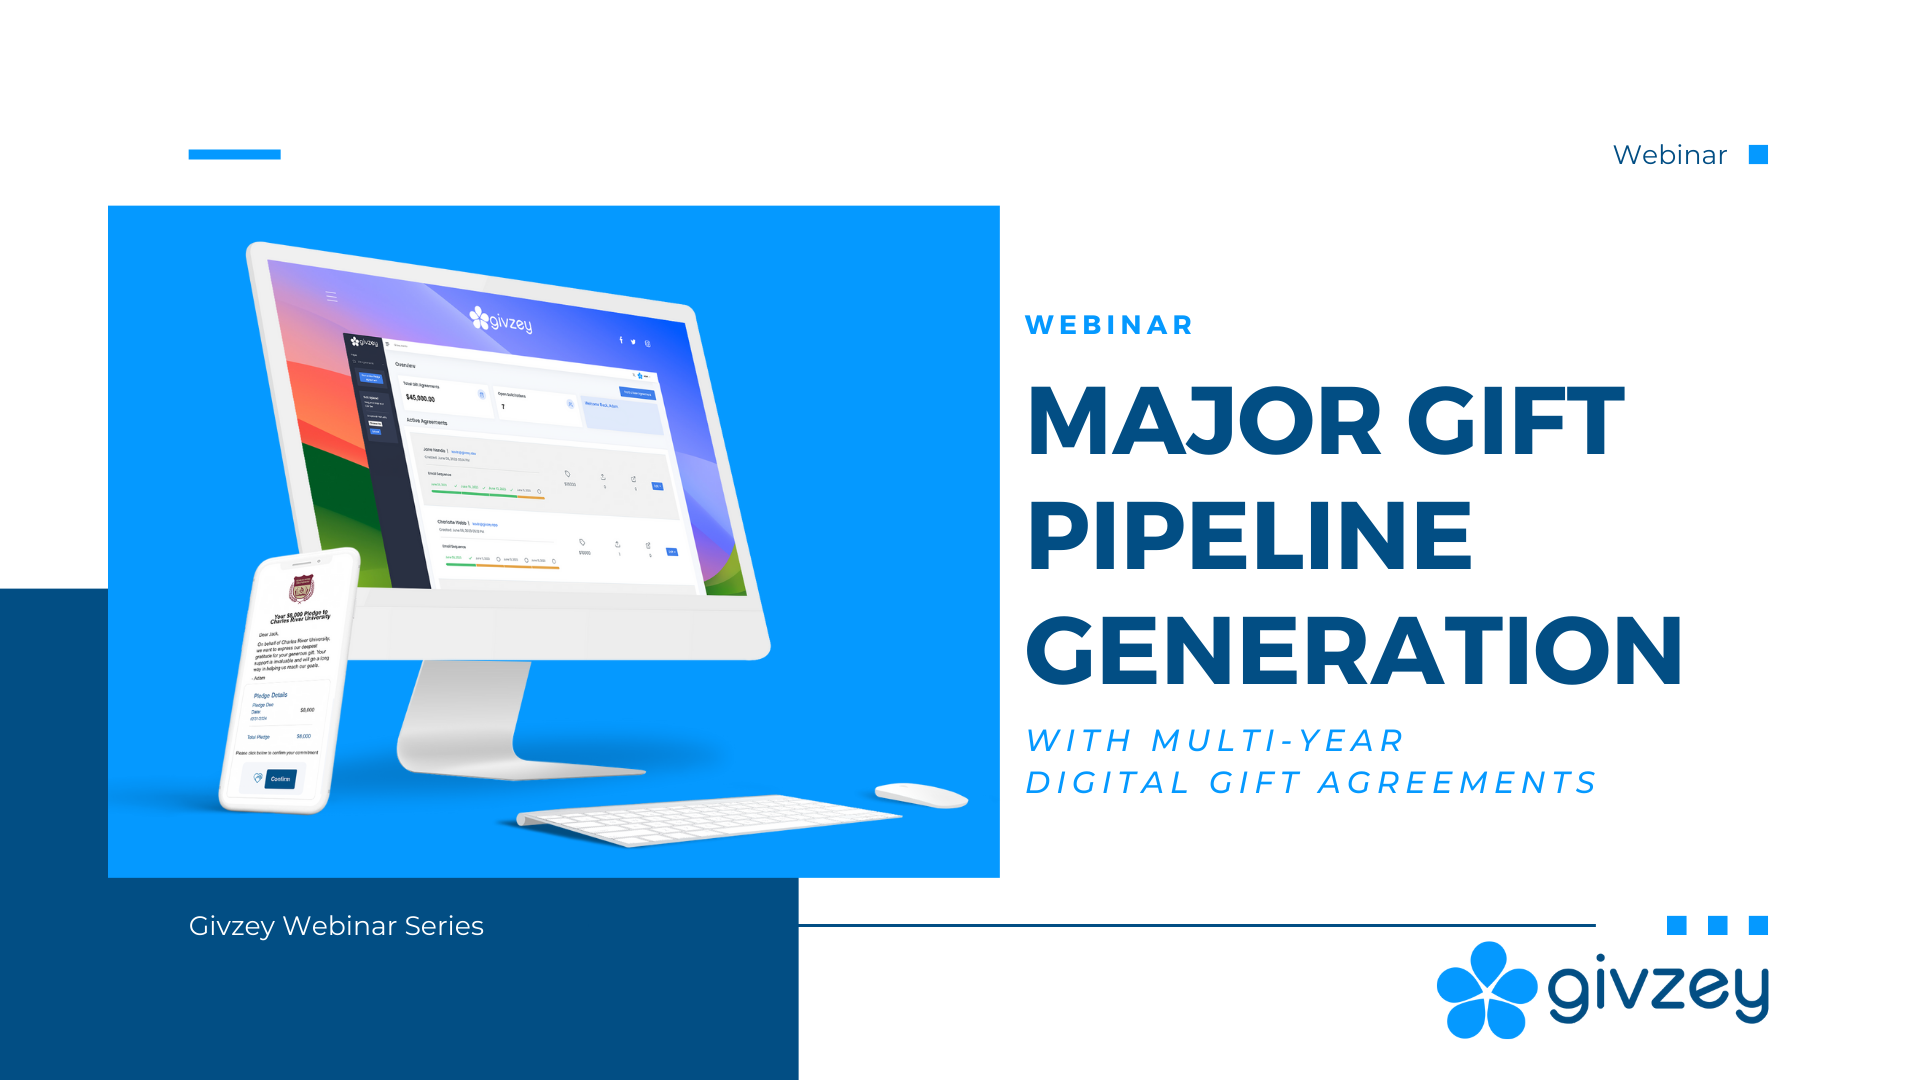 Major Gift Pipeline Generation with Multi-Year Commitments